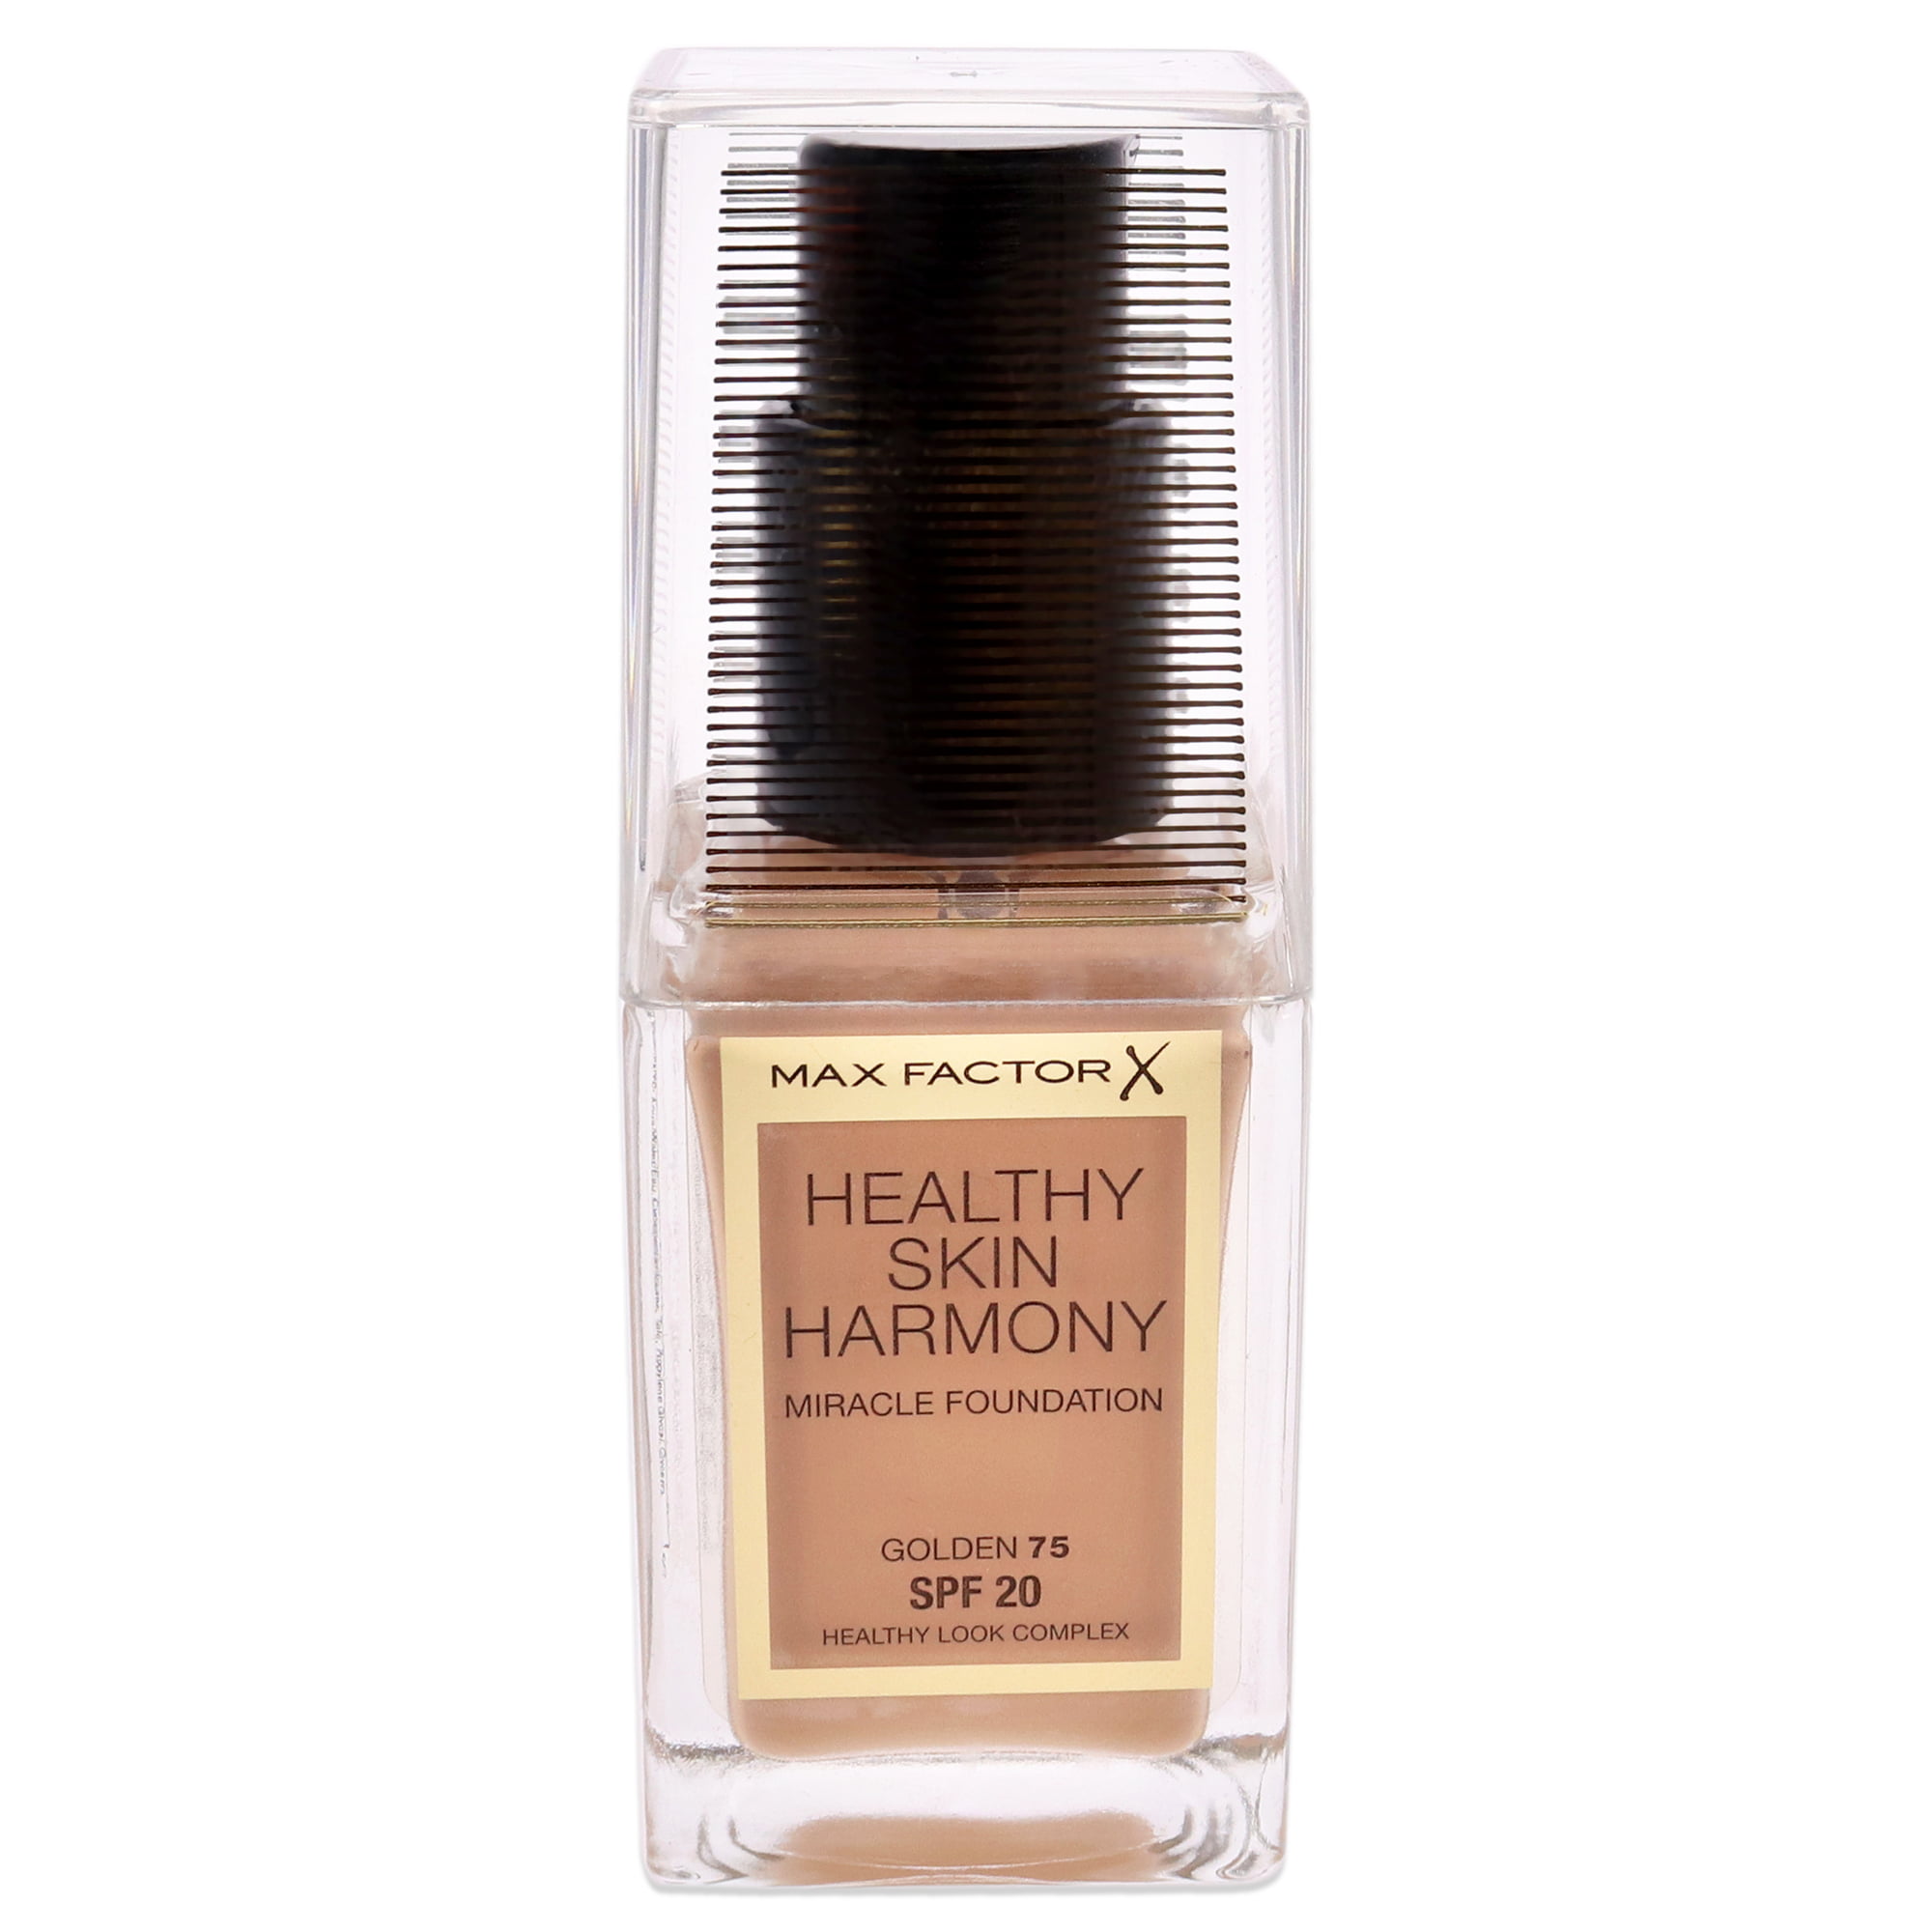 Max Factor Healthy Skin Harmony Miracle Foundation SPF - 75 Golden - Pack of 2, oz -